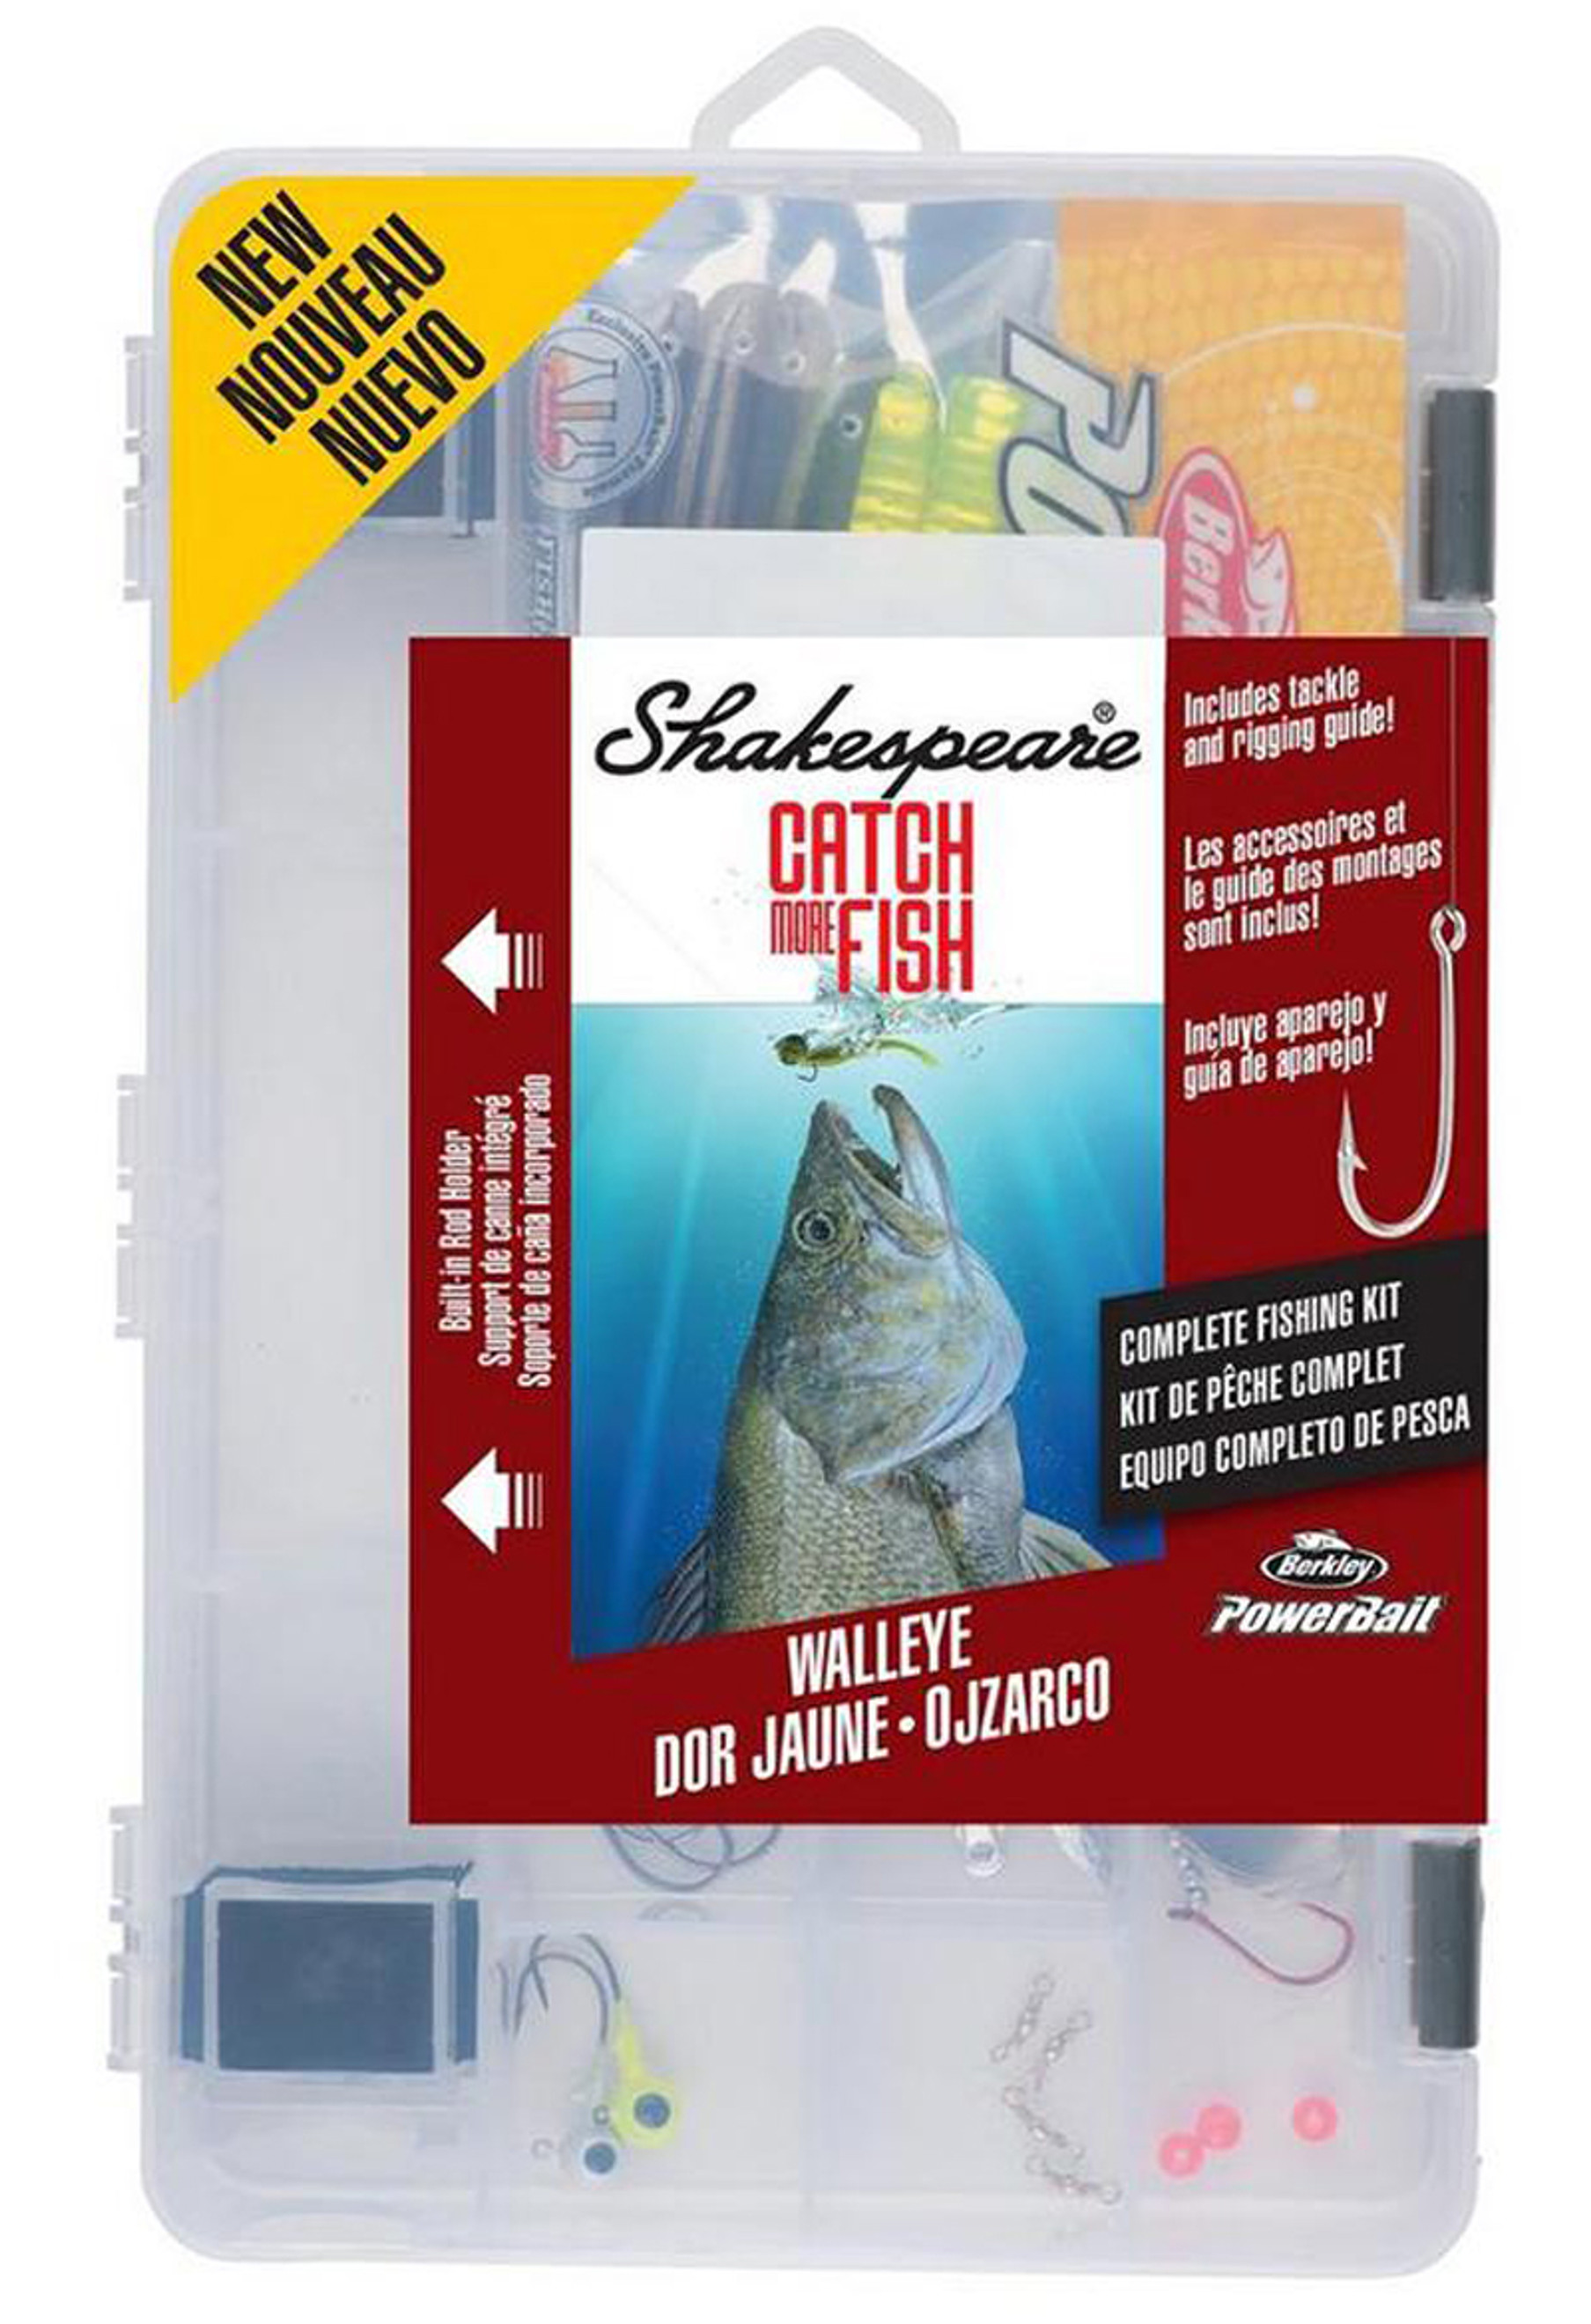 Shakespeare Catch More Fish Tackle Box Kit (Model: Walleye)